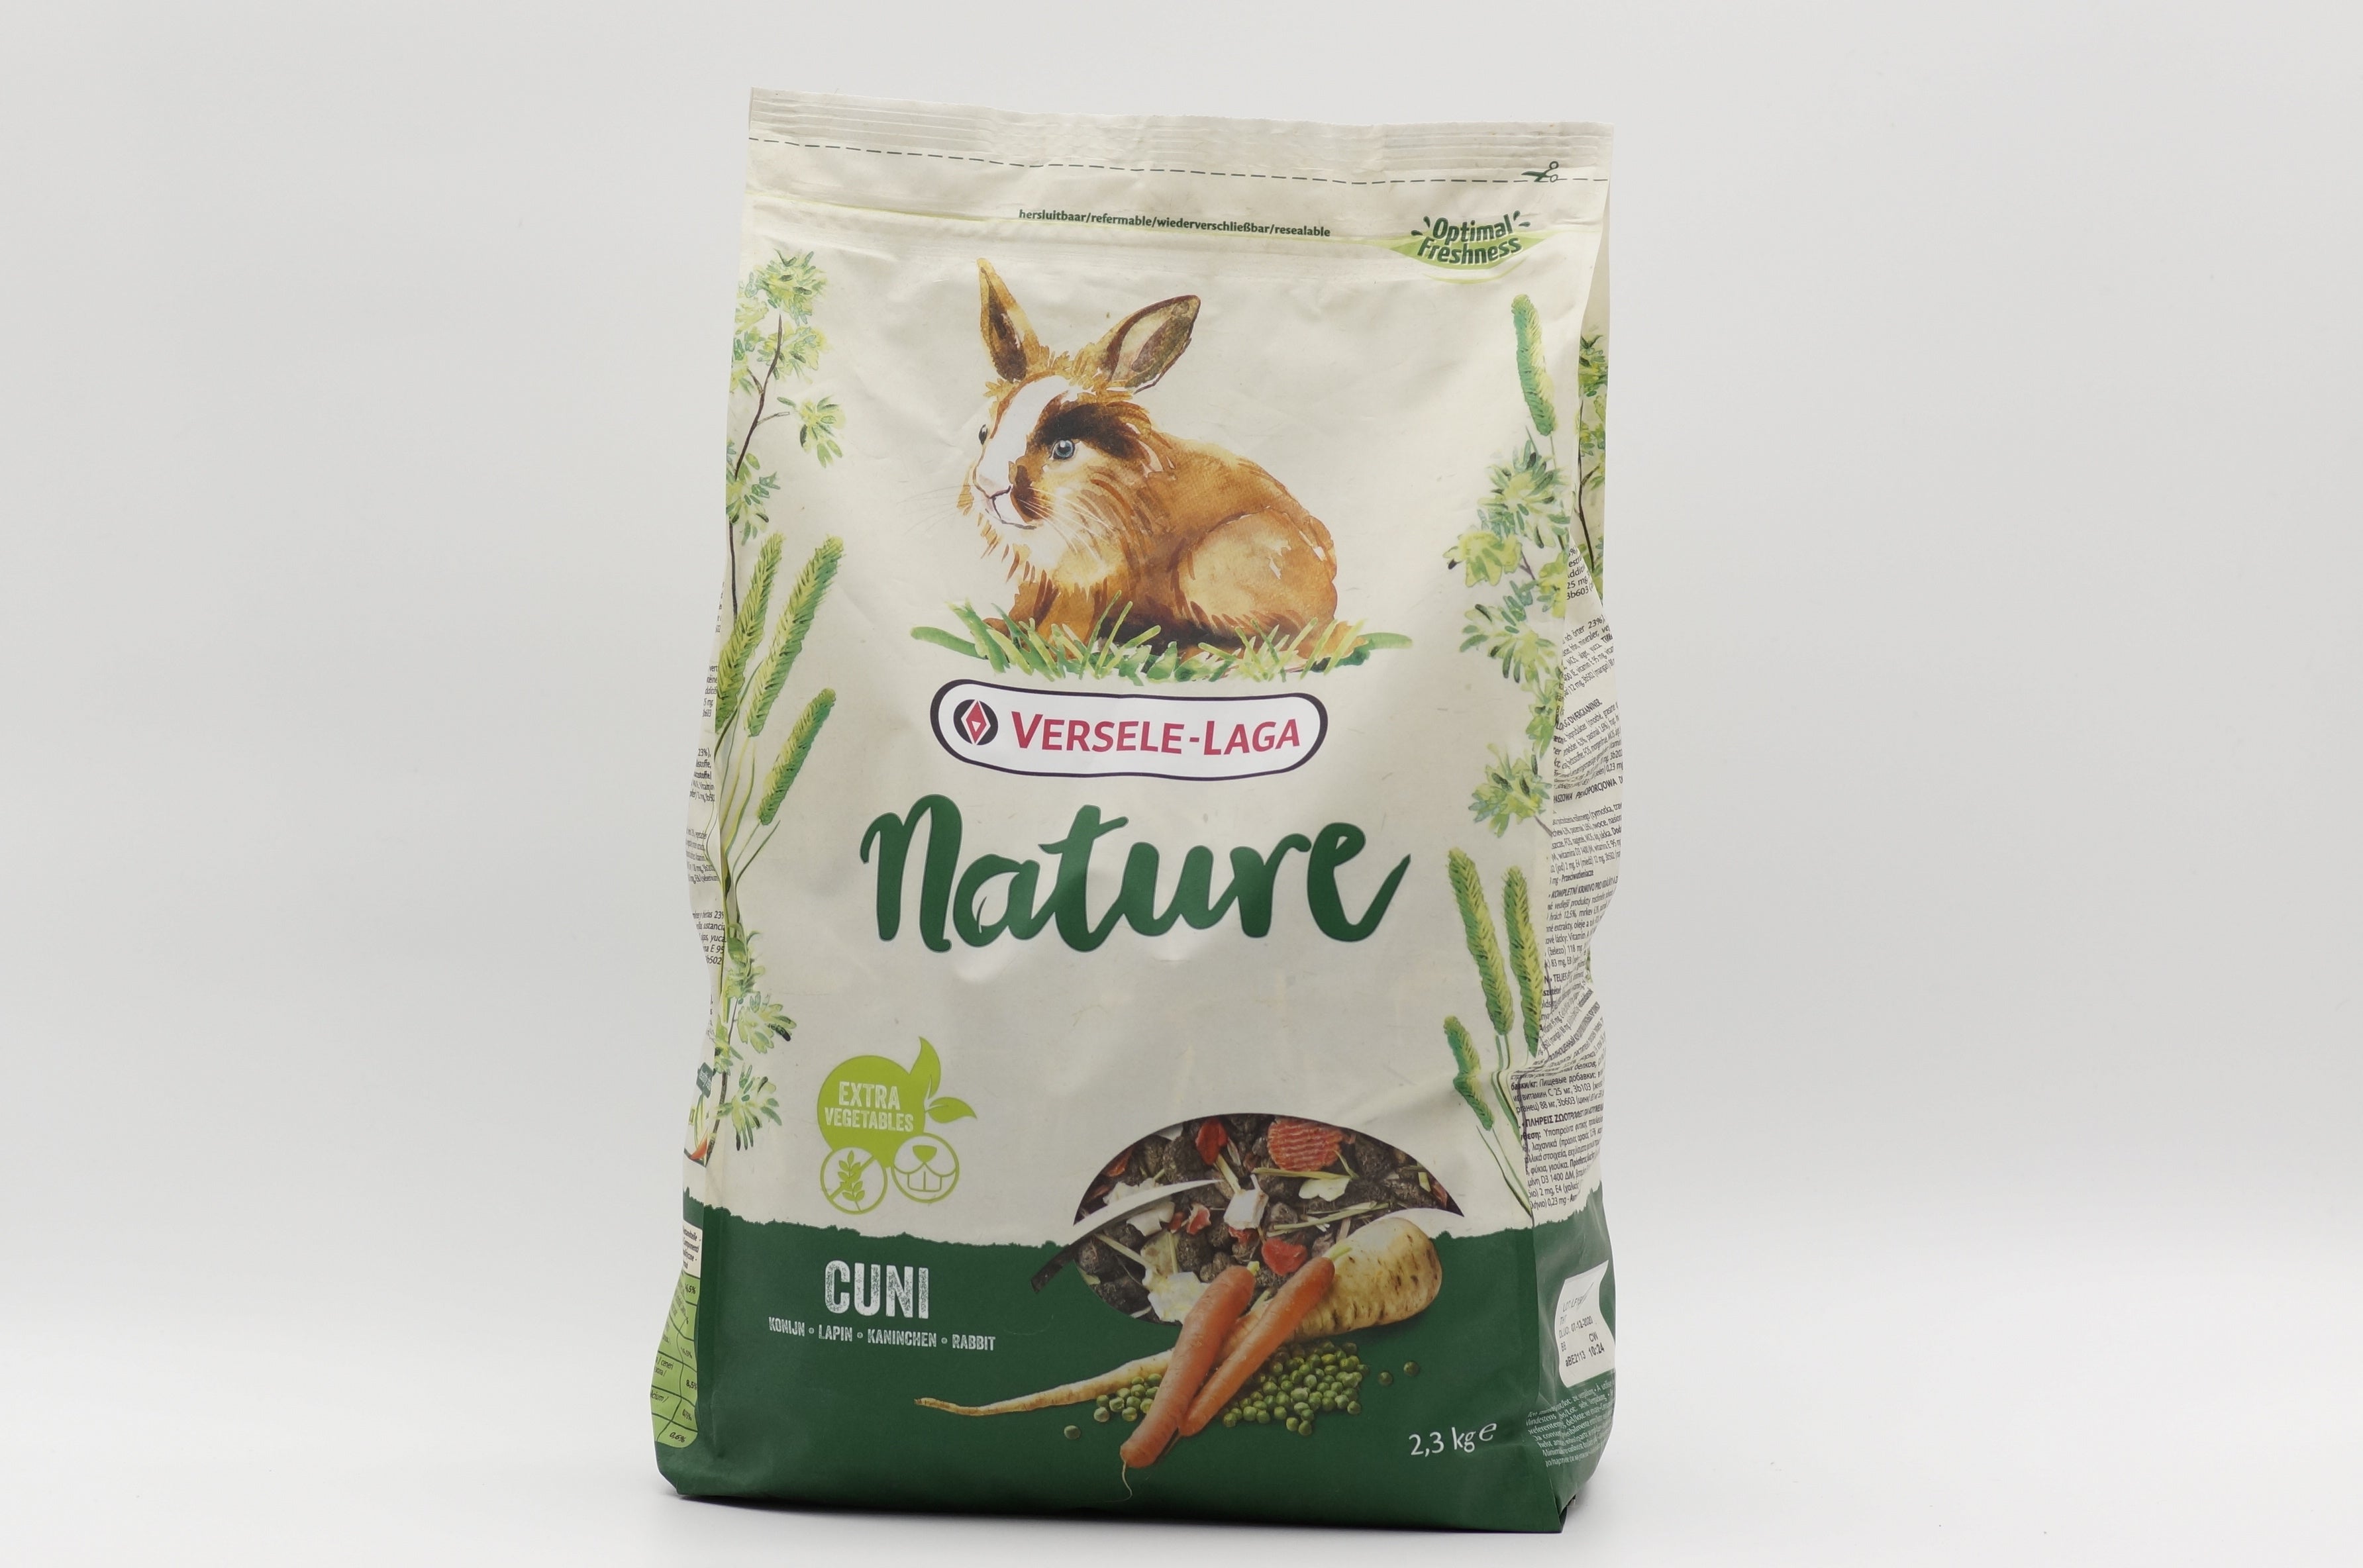 Food and care products for your rabbit - Versele-Laga